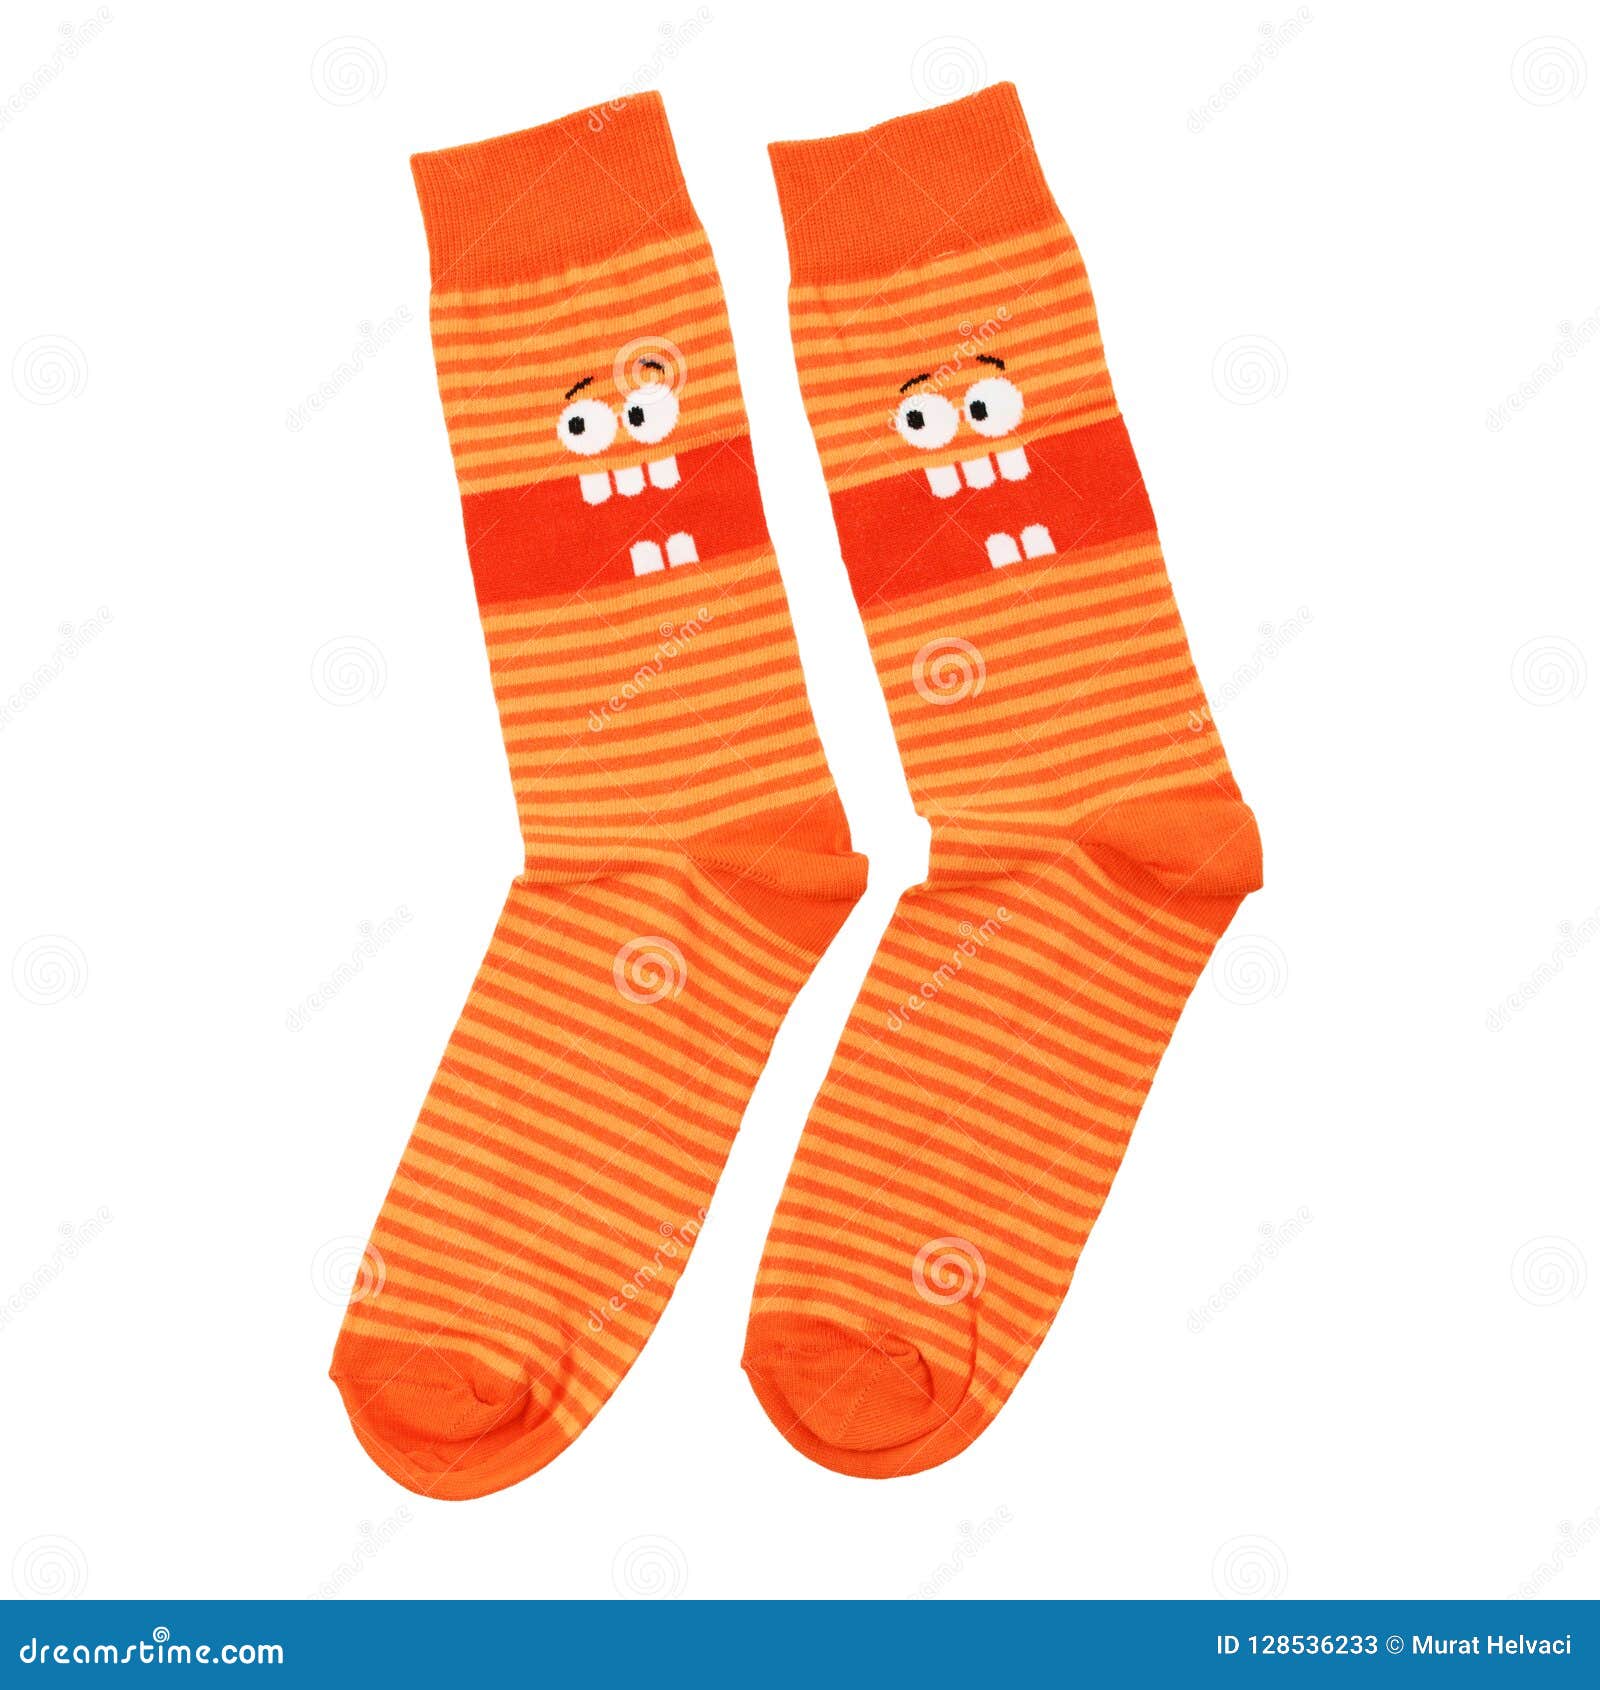 Colored Socks on a White Background Stock Image - Image of closeup ...